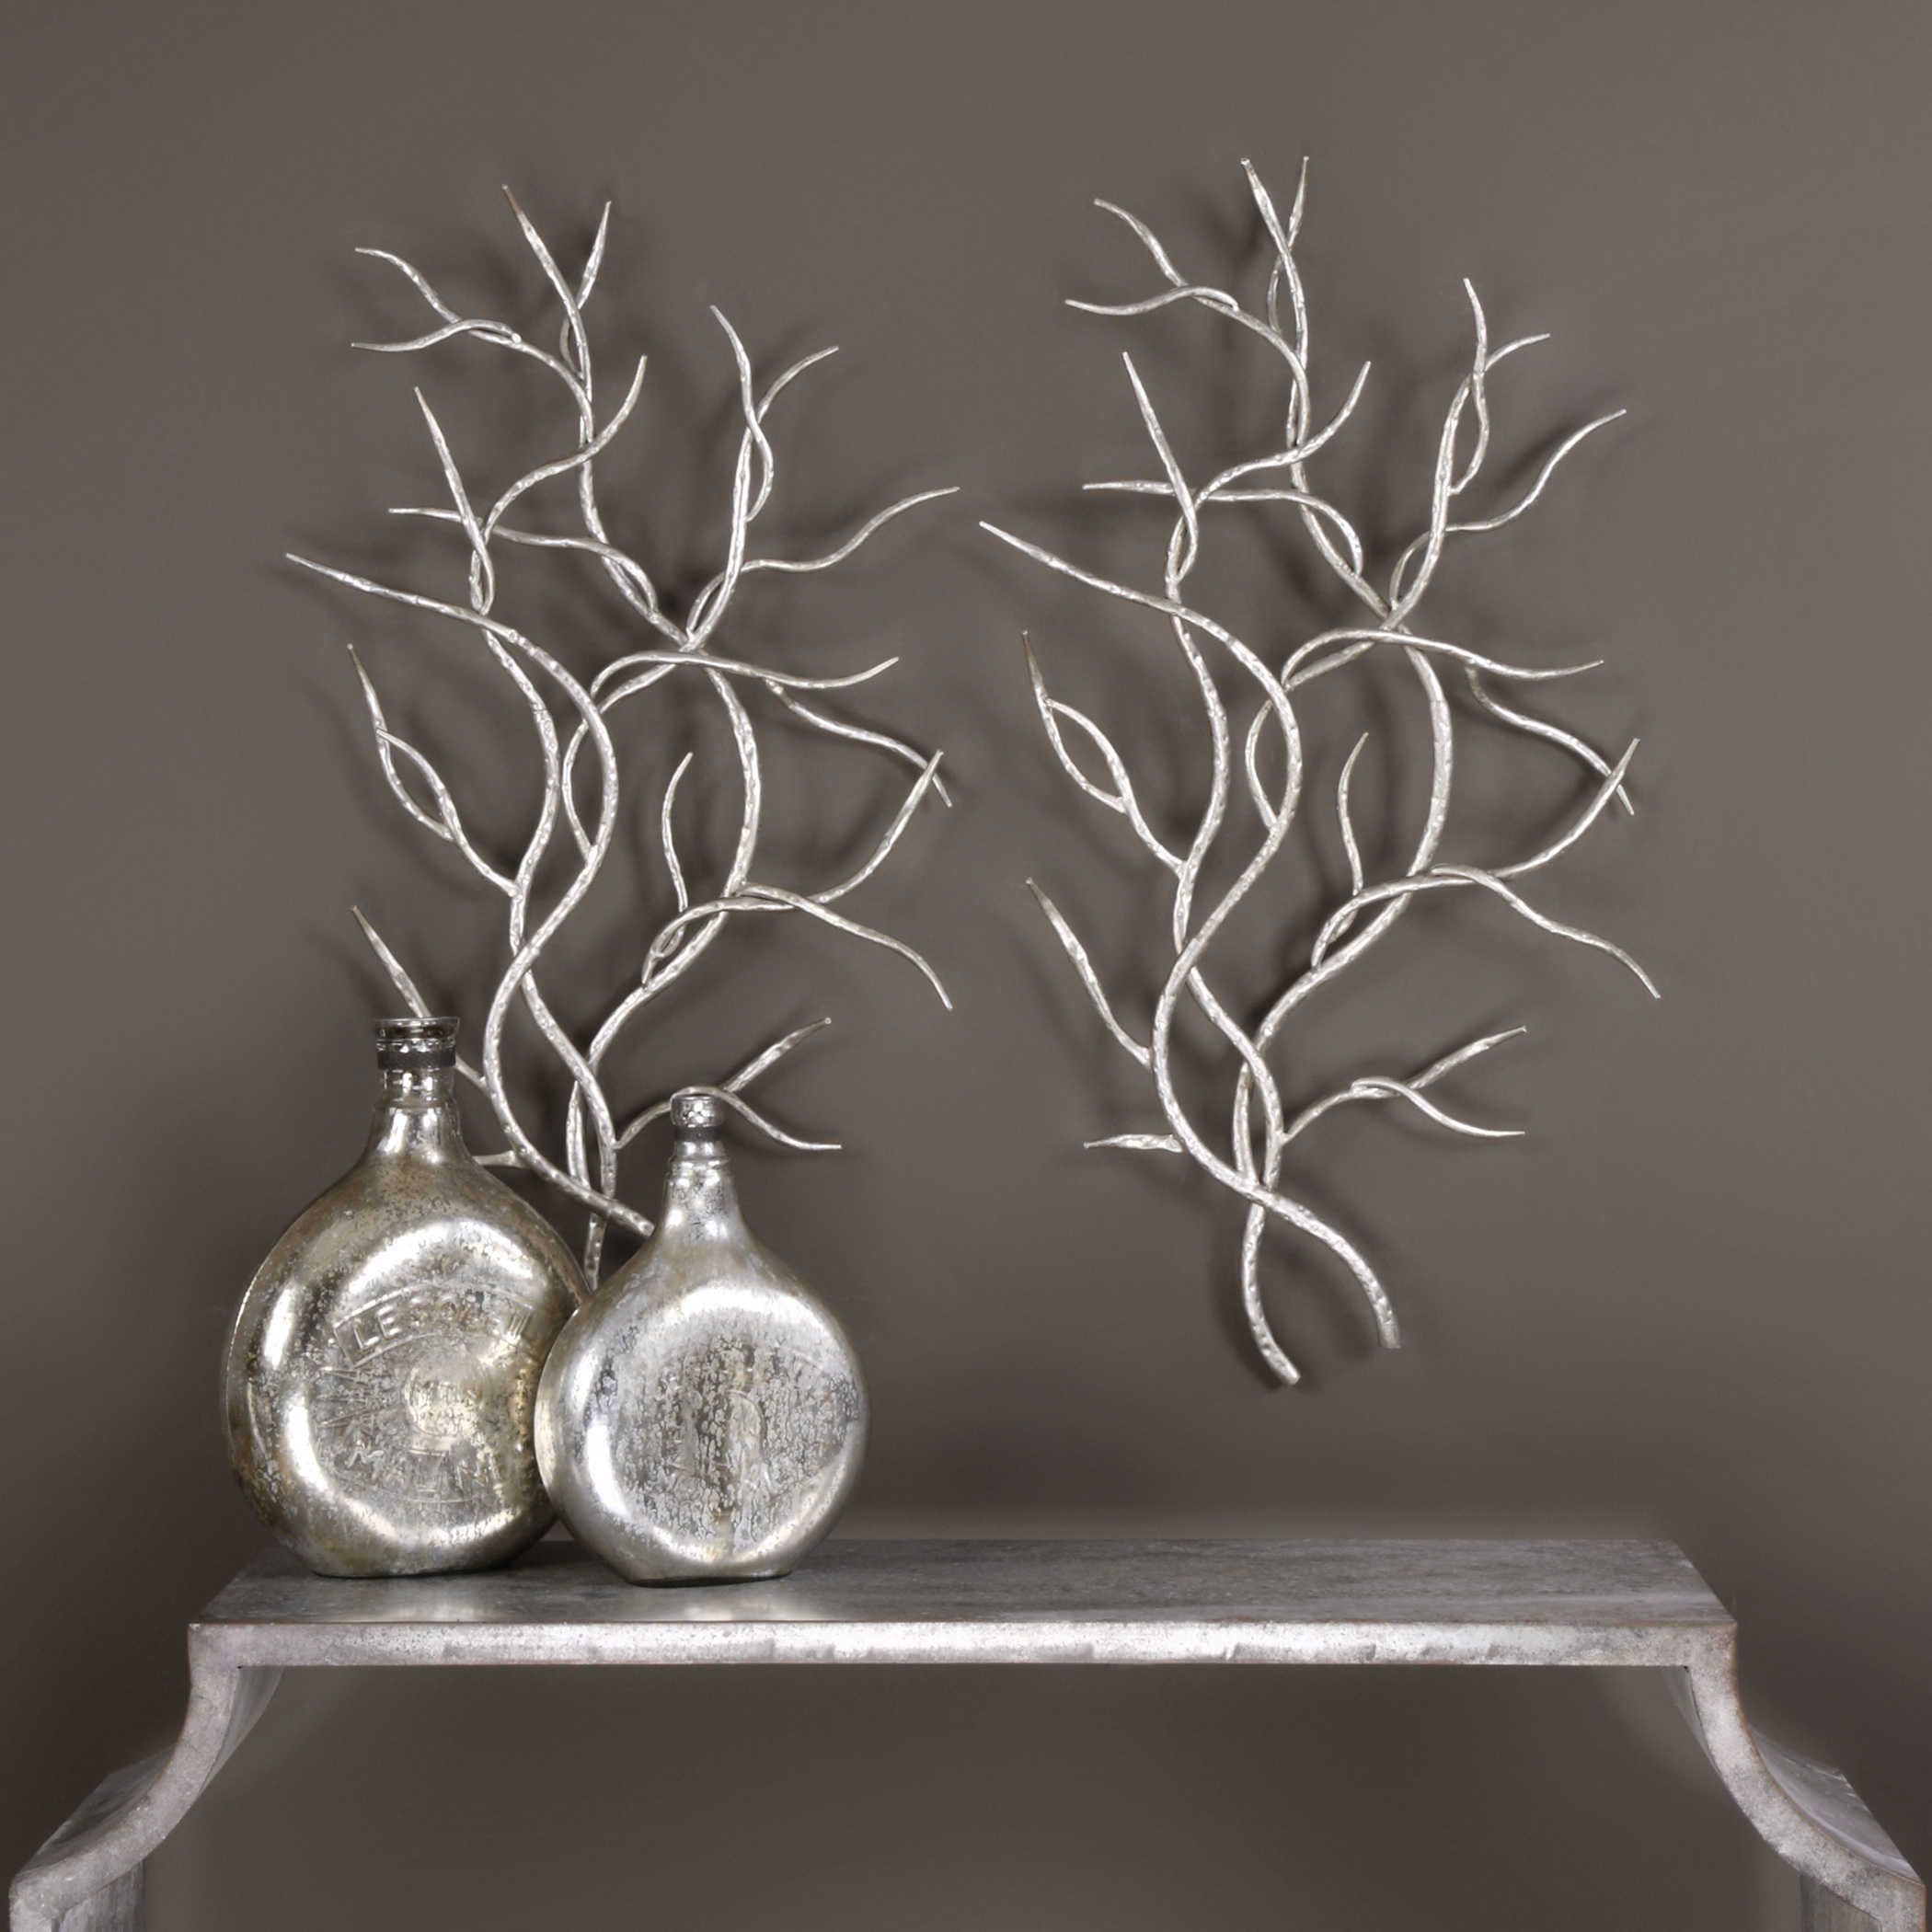 Silver Branches Metal Wall Decor, S/2 | Uttermost Within Most Popular Antique Silver Metal Wall Art Sculptures (View 12 of 20)